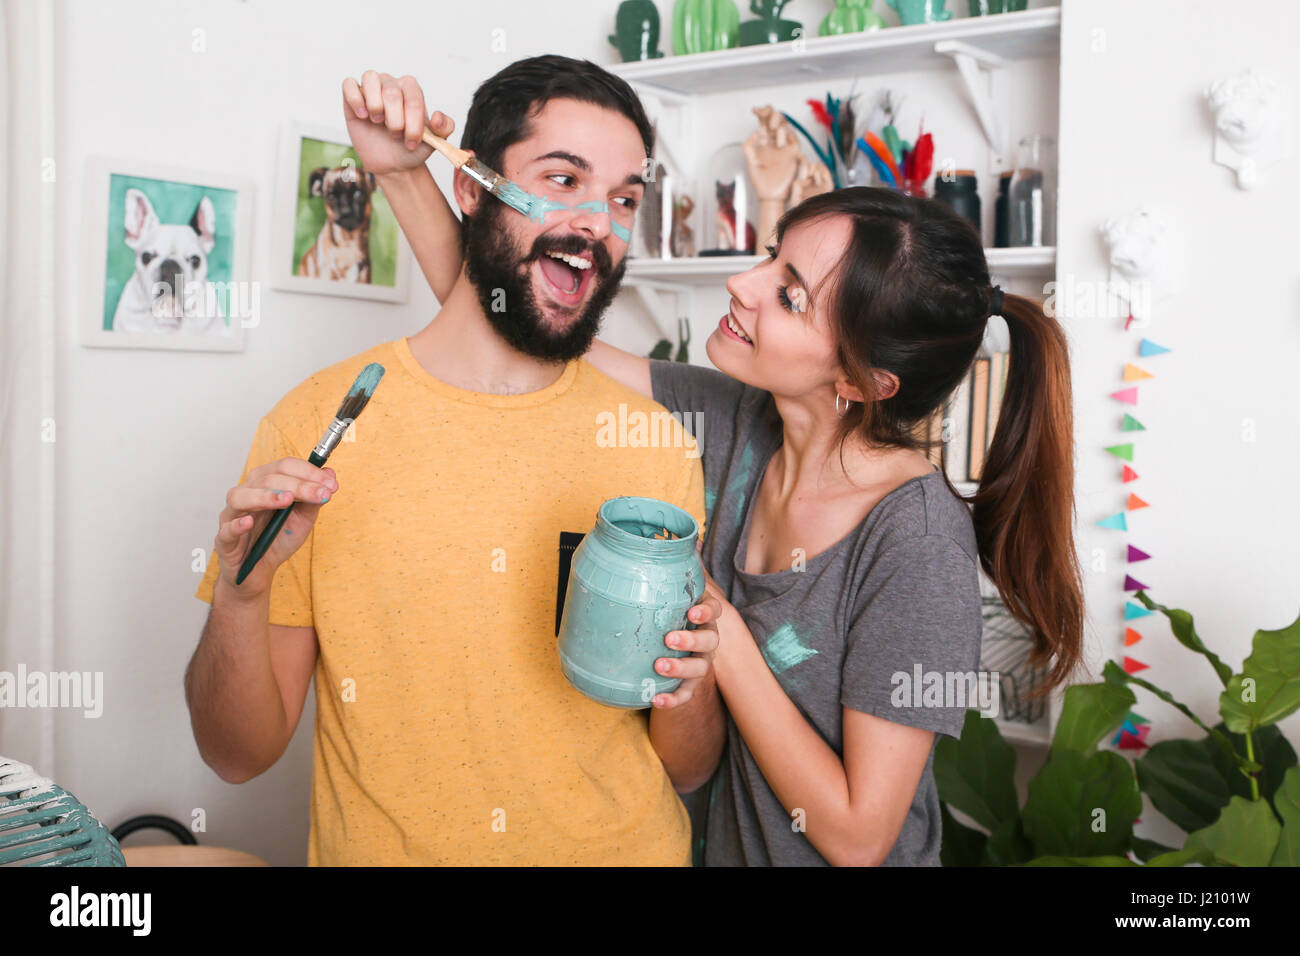 Young woman painting her boyfriend's face with paintbrush Stock Photo